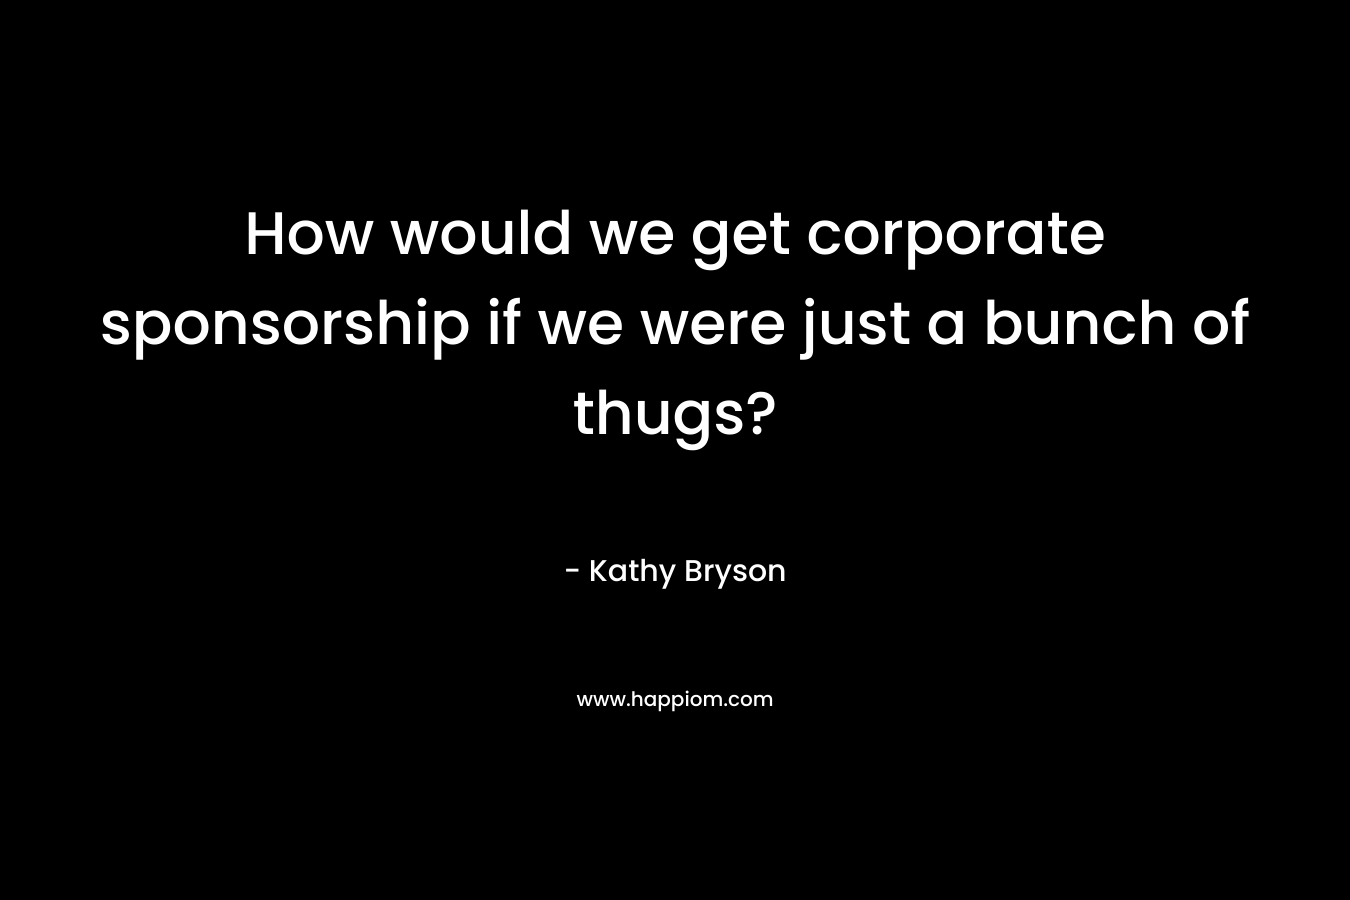 How would we get corporate sponsorship if we were just a bunch of thugs? – Kathy Bryson